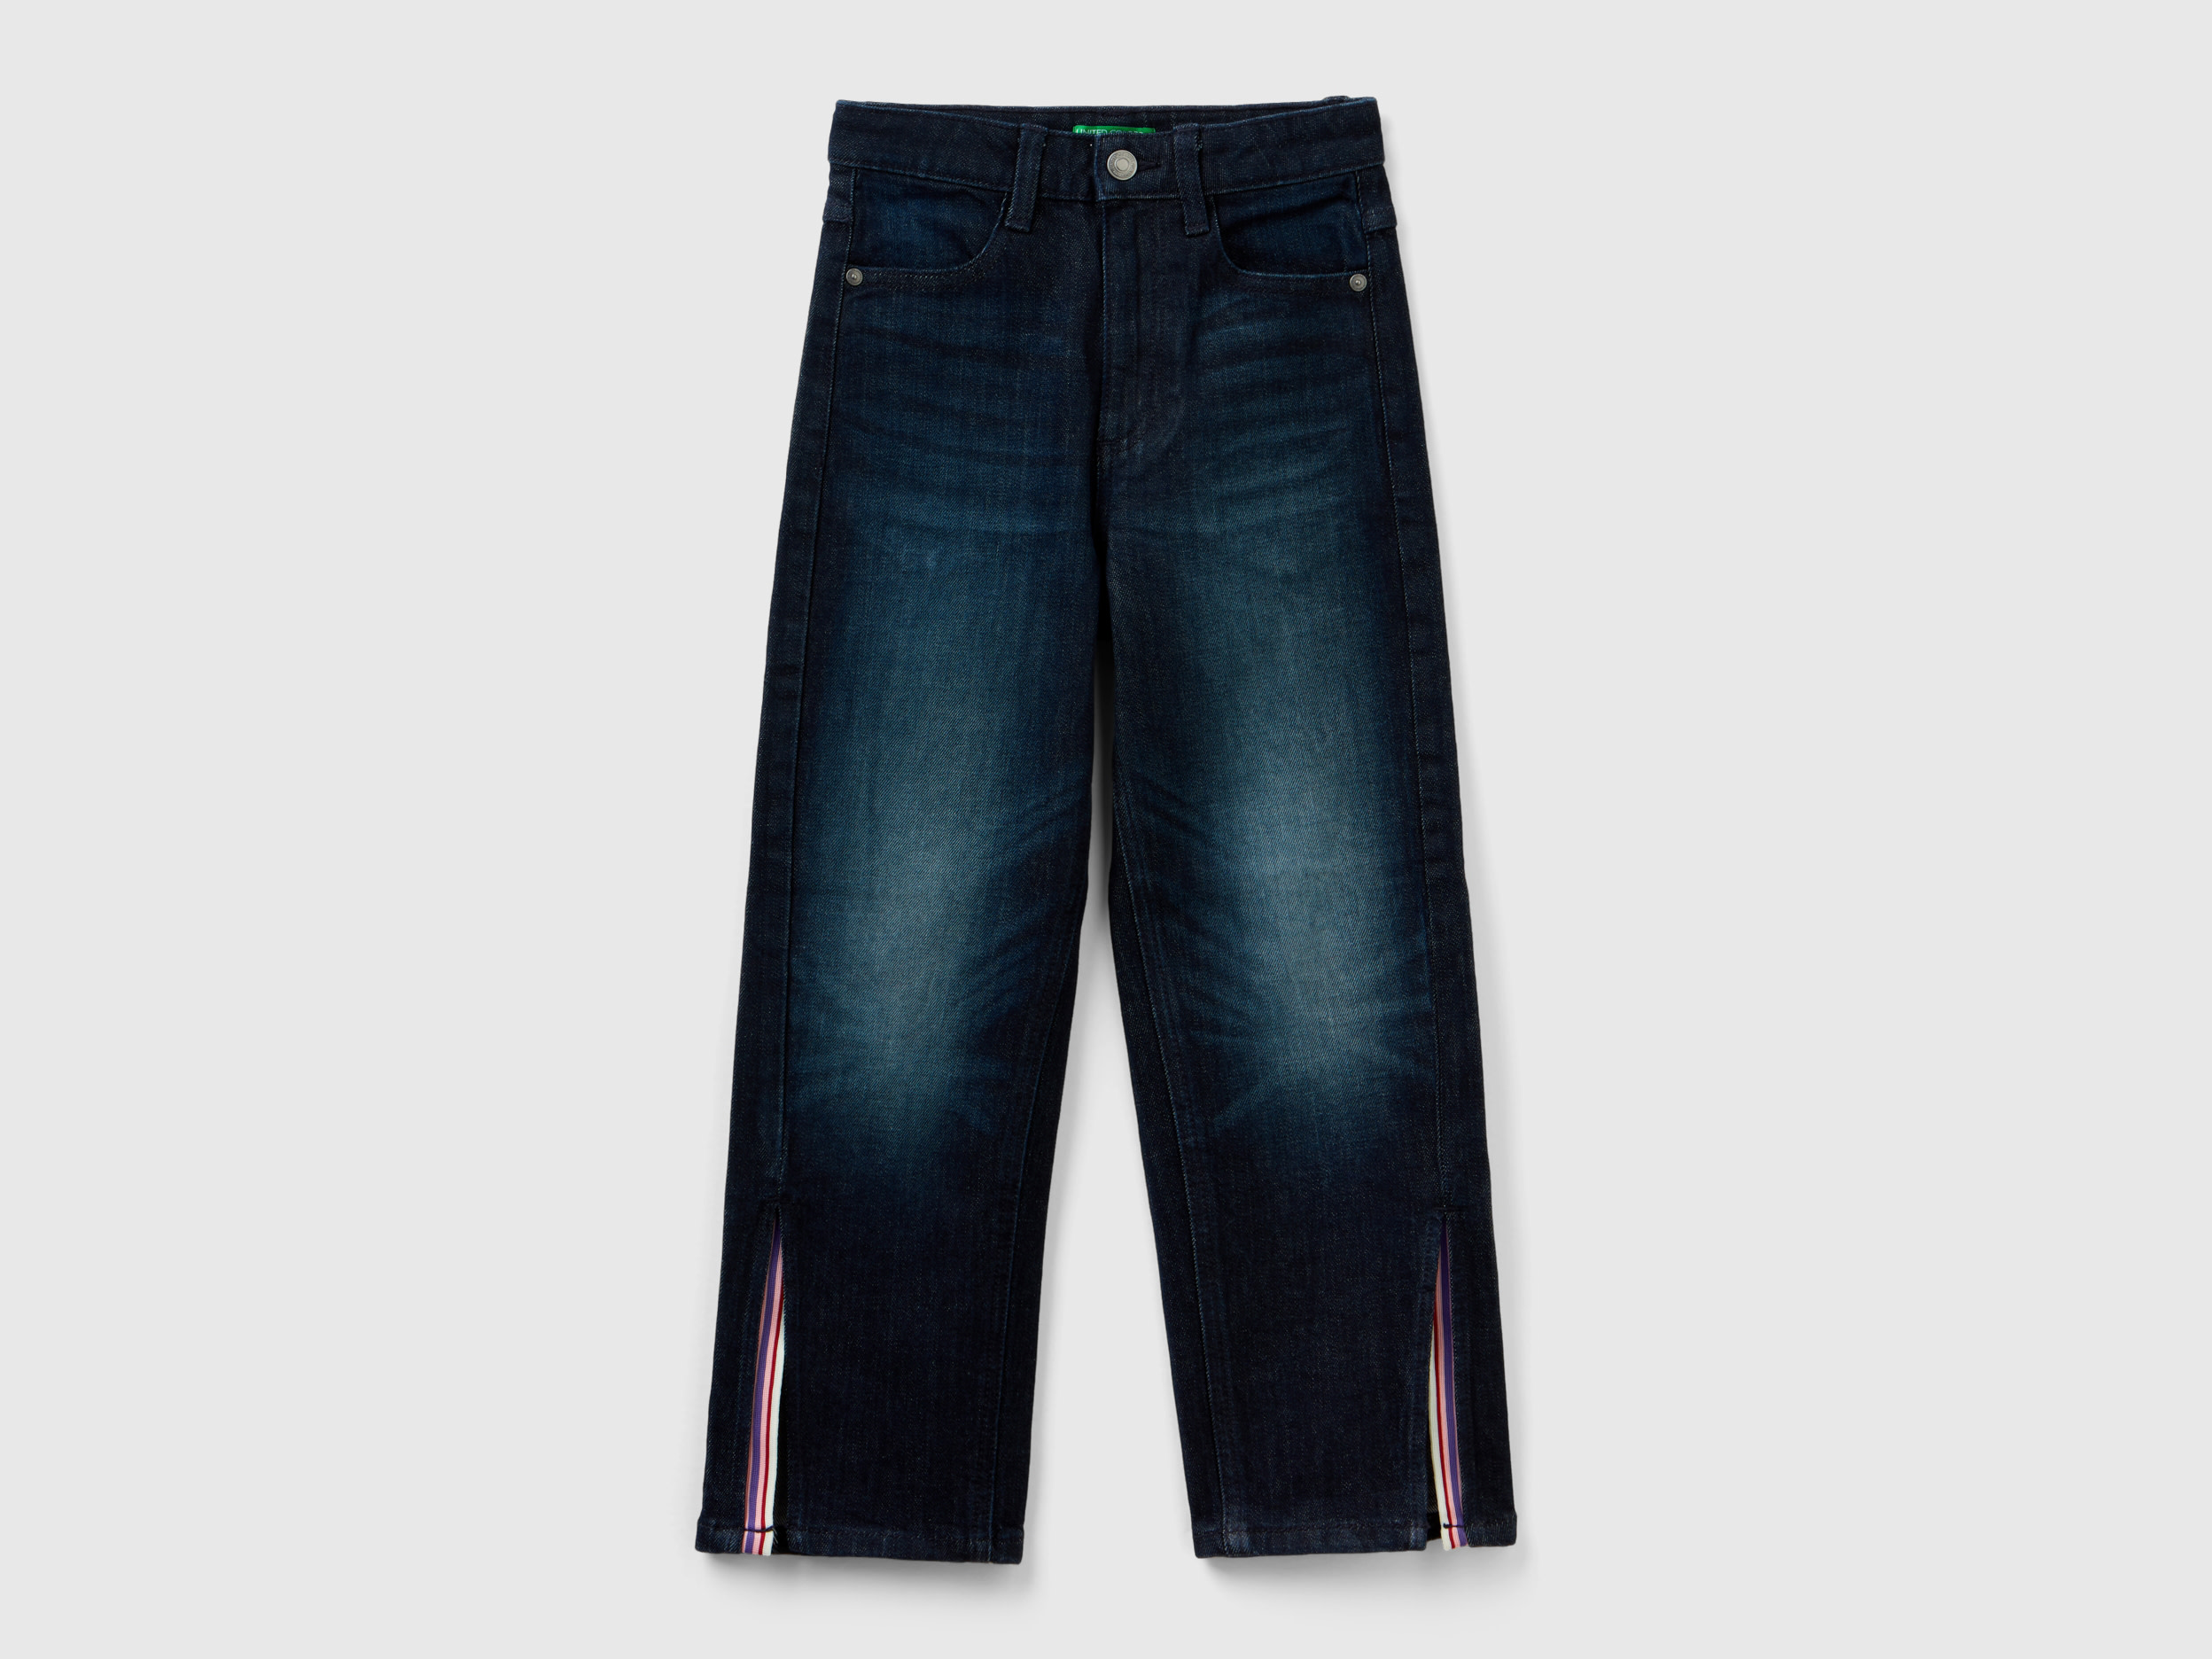 Benetton, Straight Fit Jeans With Slits, size 3XL, Dark Blue, Kids